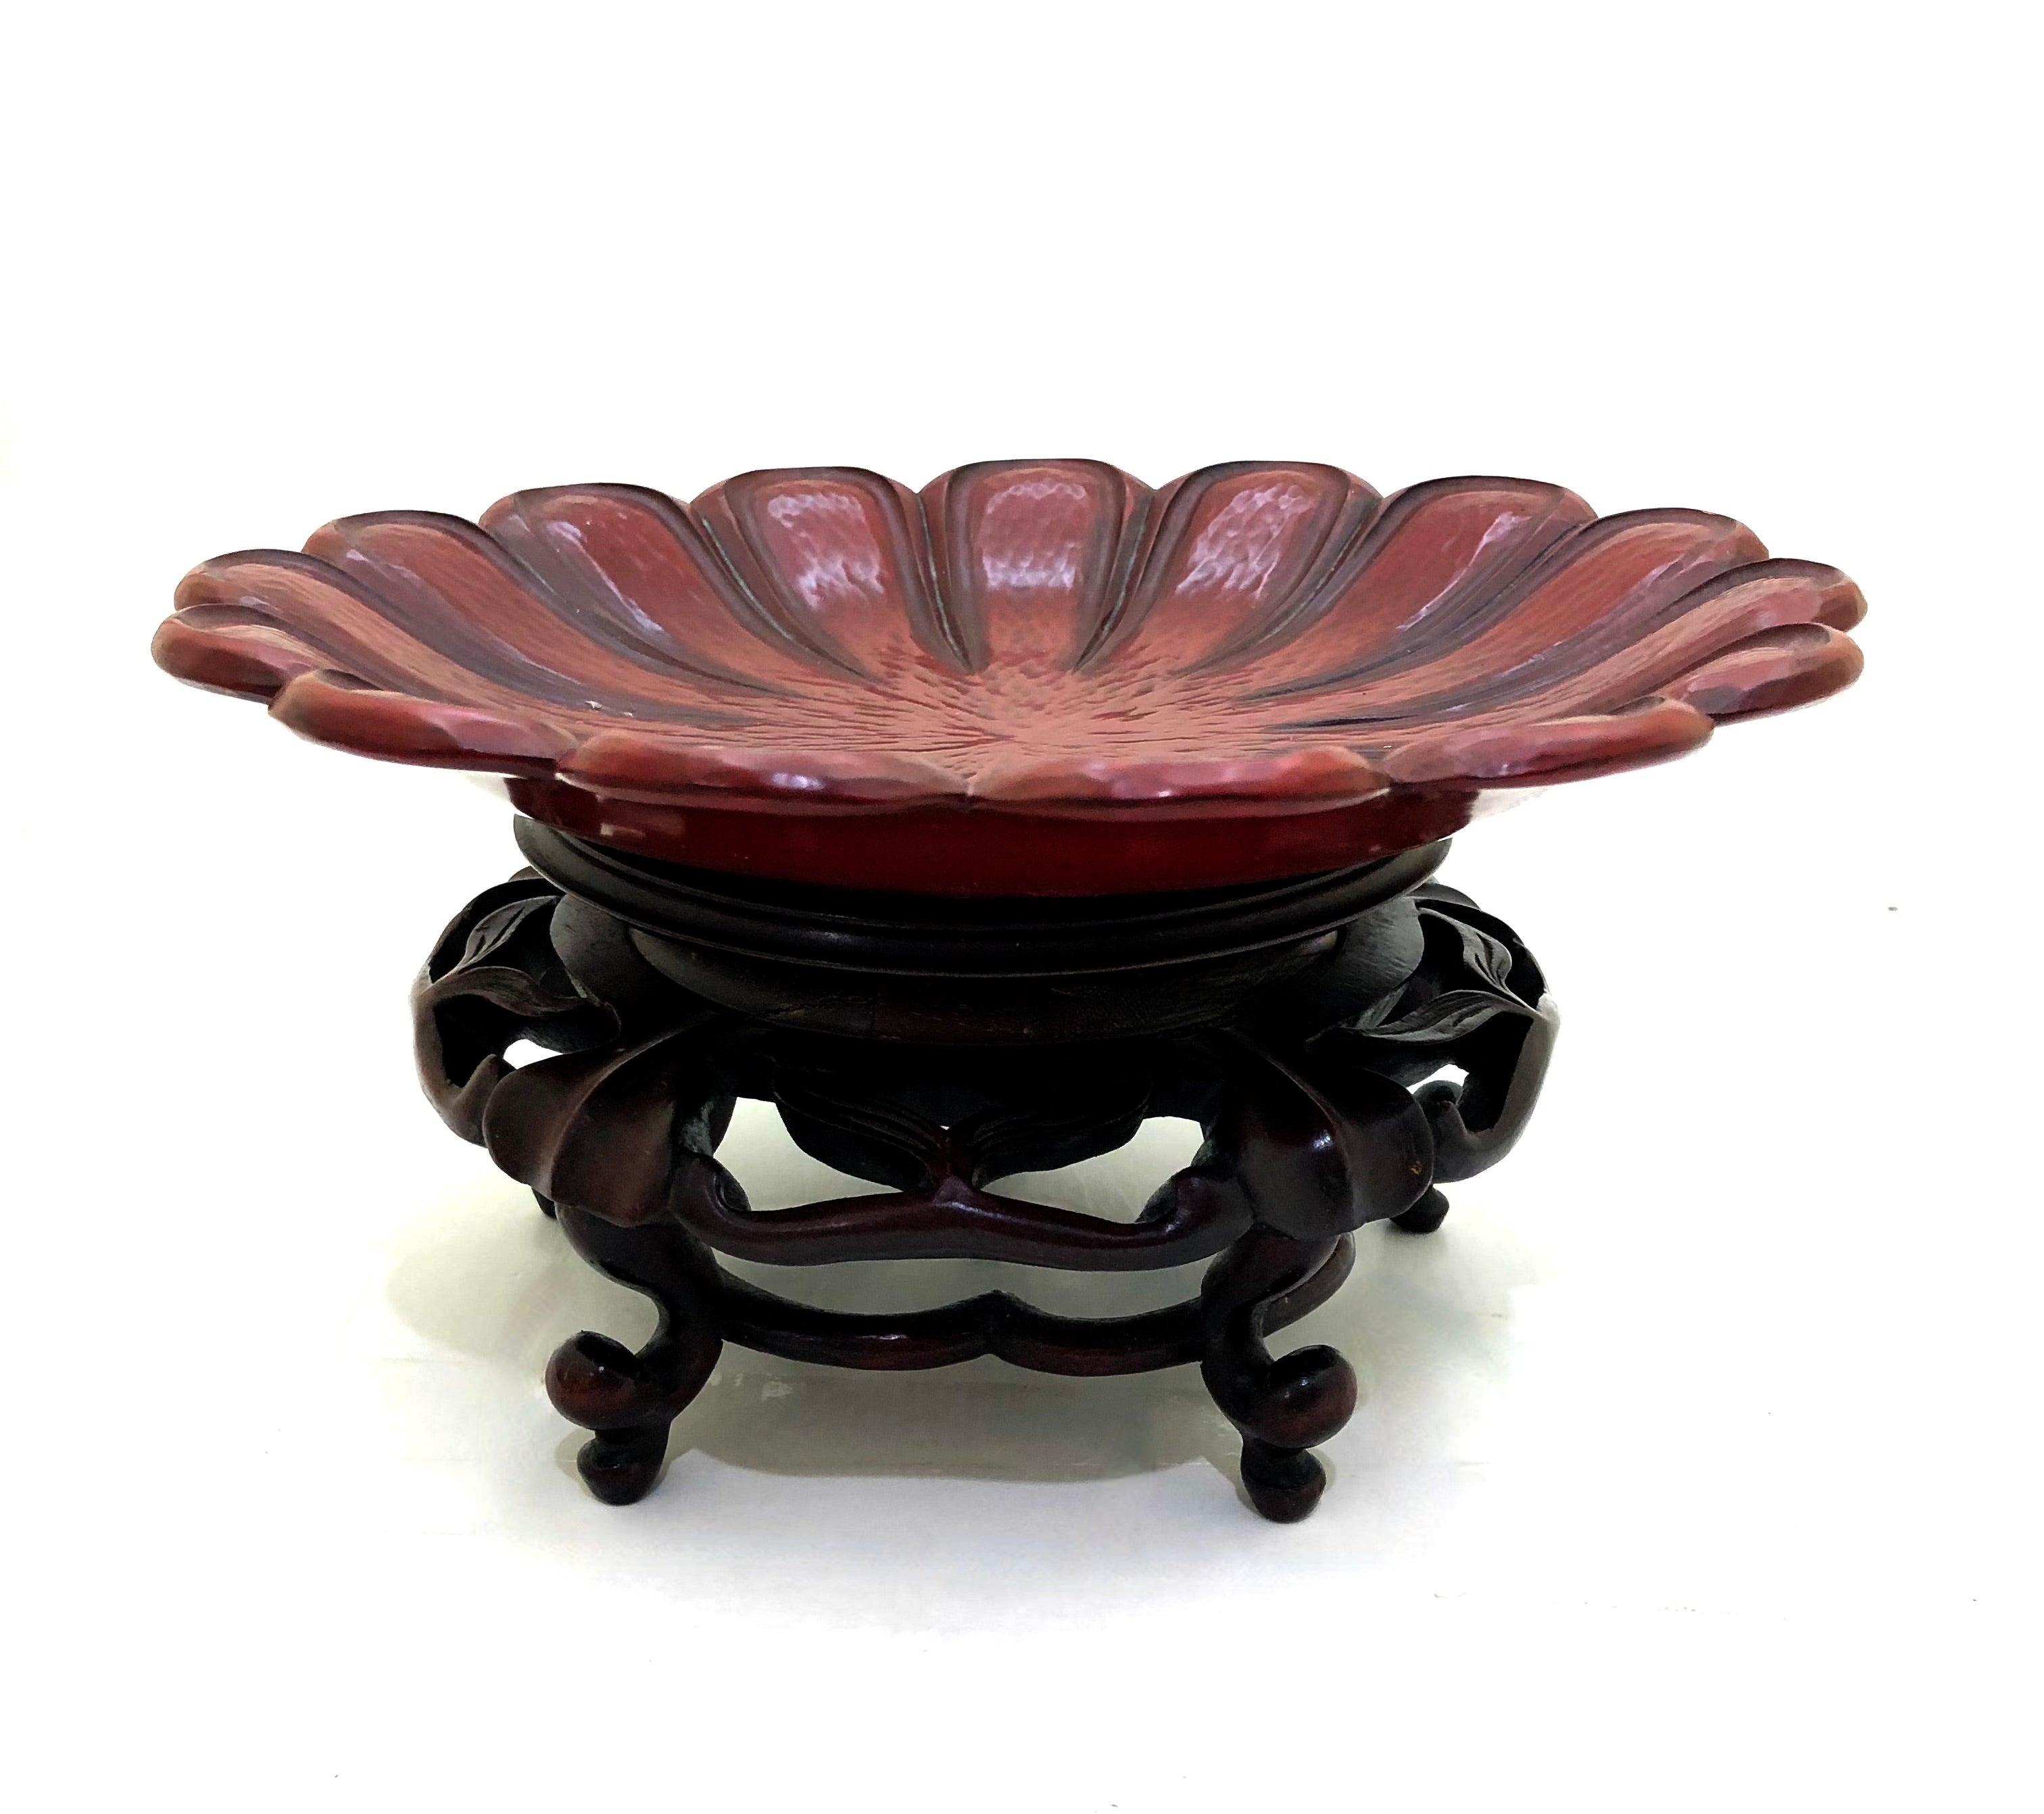 Antique Japanese Kamakura-Bori Lacquer Flower Tray with Antique Rosewood Stand